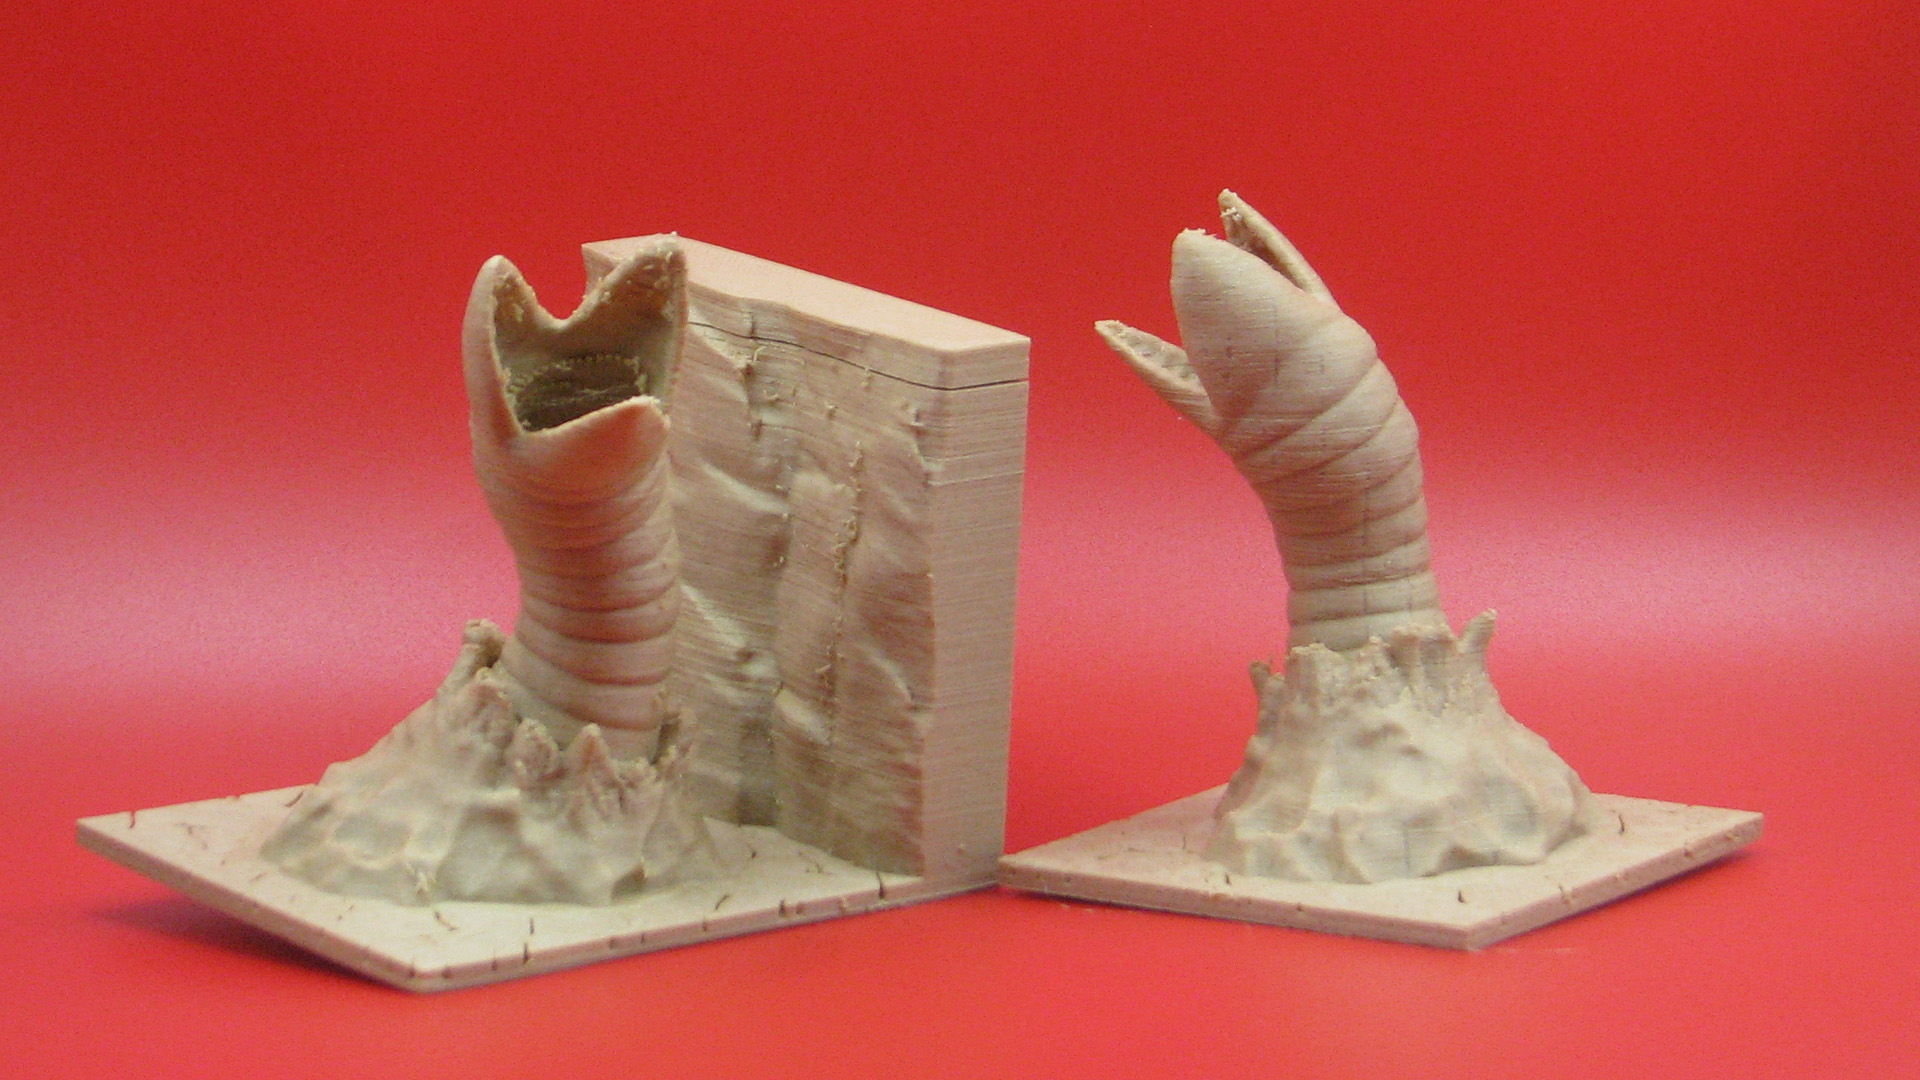 3D printed Sandworm bookends from Dune